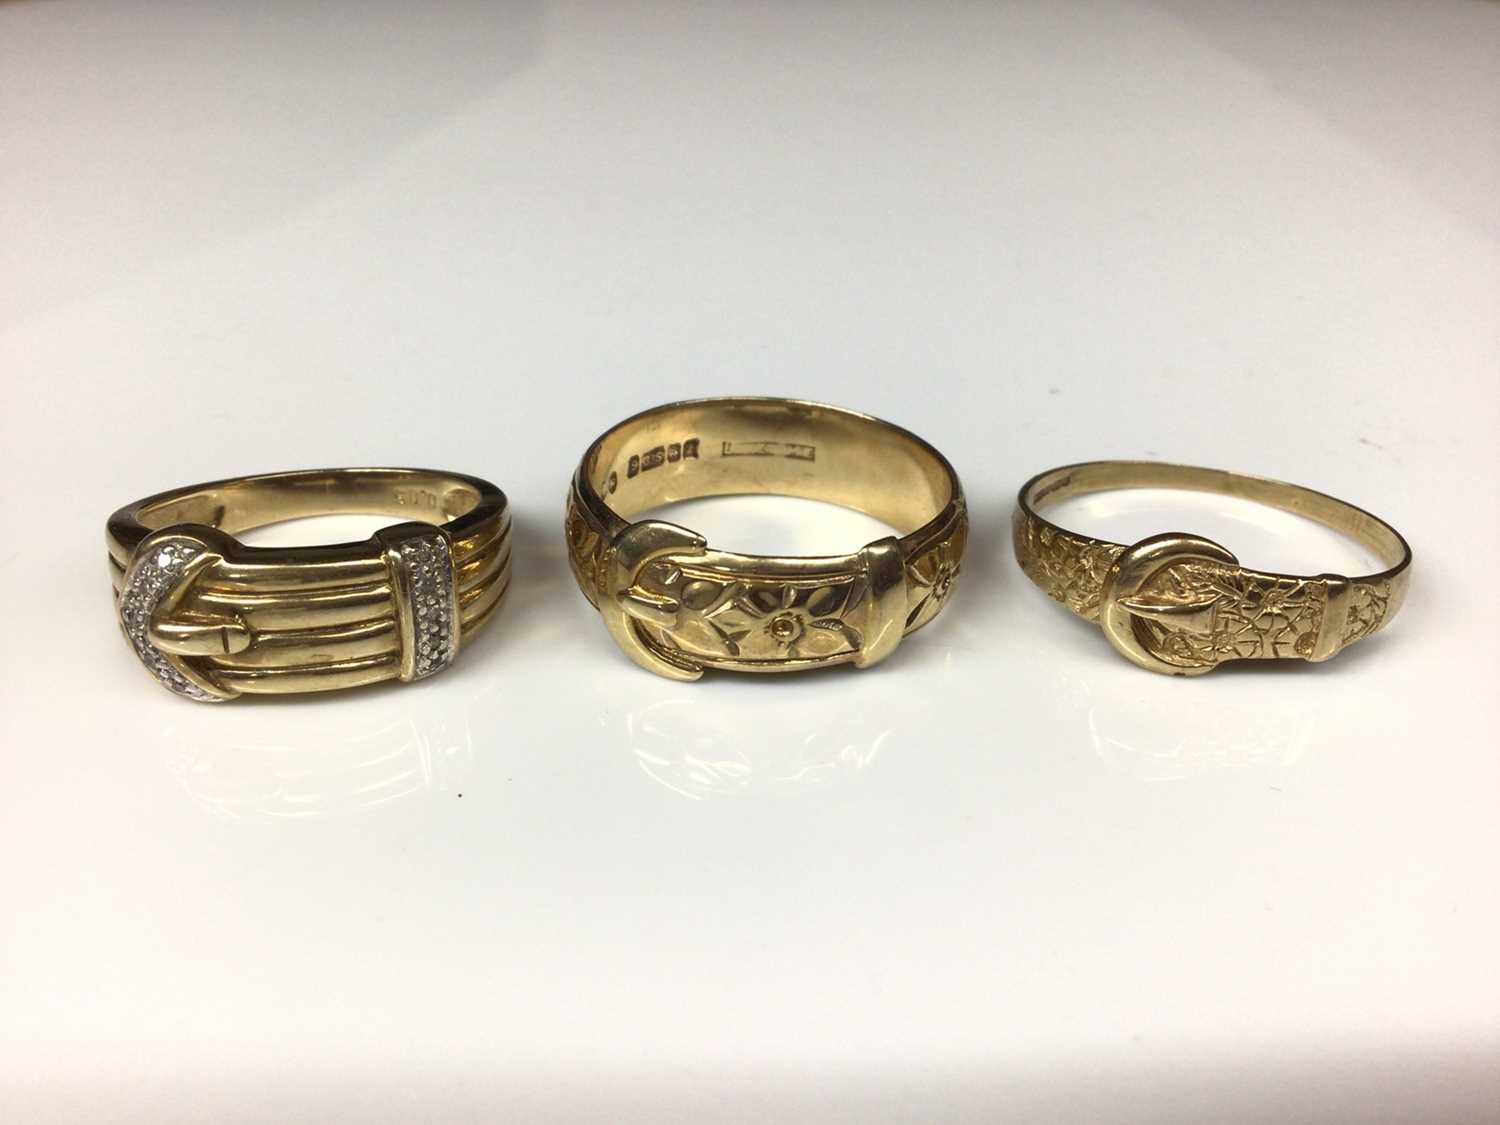 9ct gold diamond set buckle ring and two other 9ct gold buckle rings with embossed floral decoration